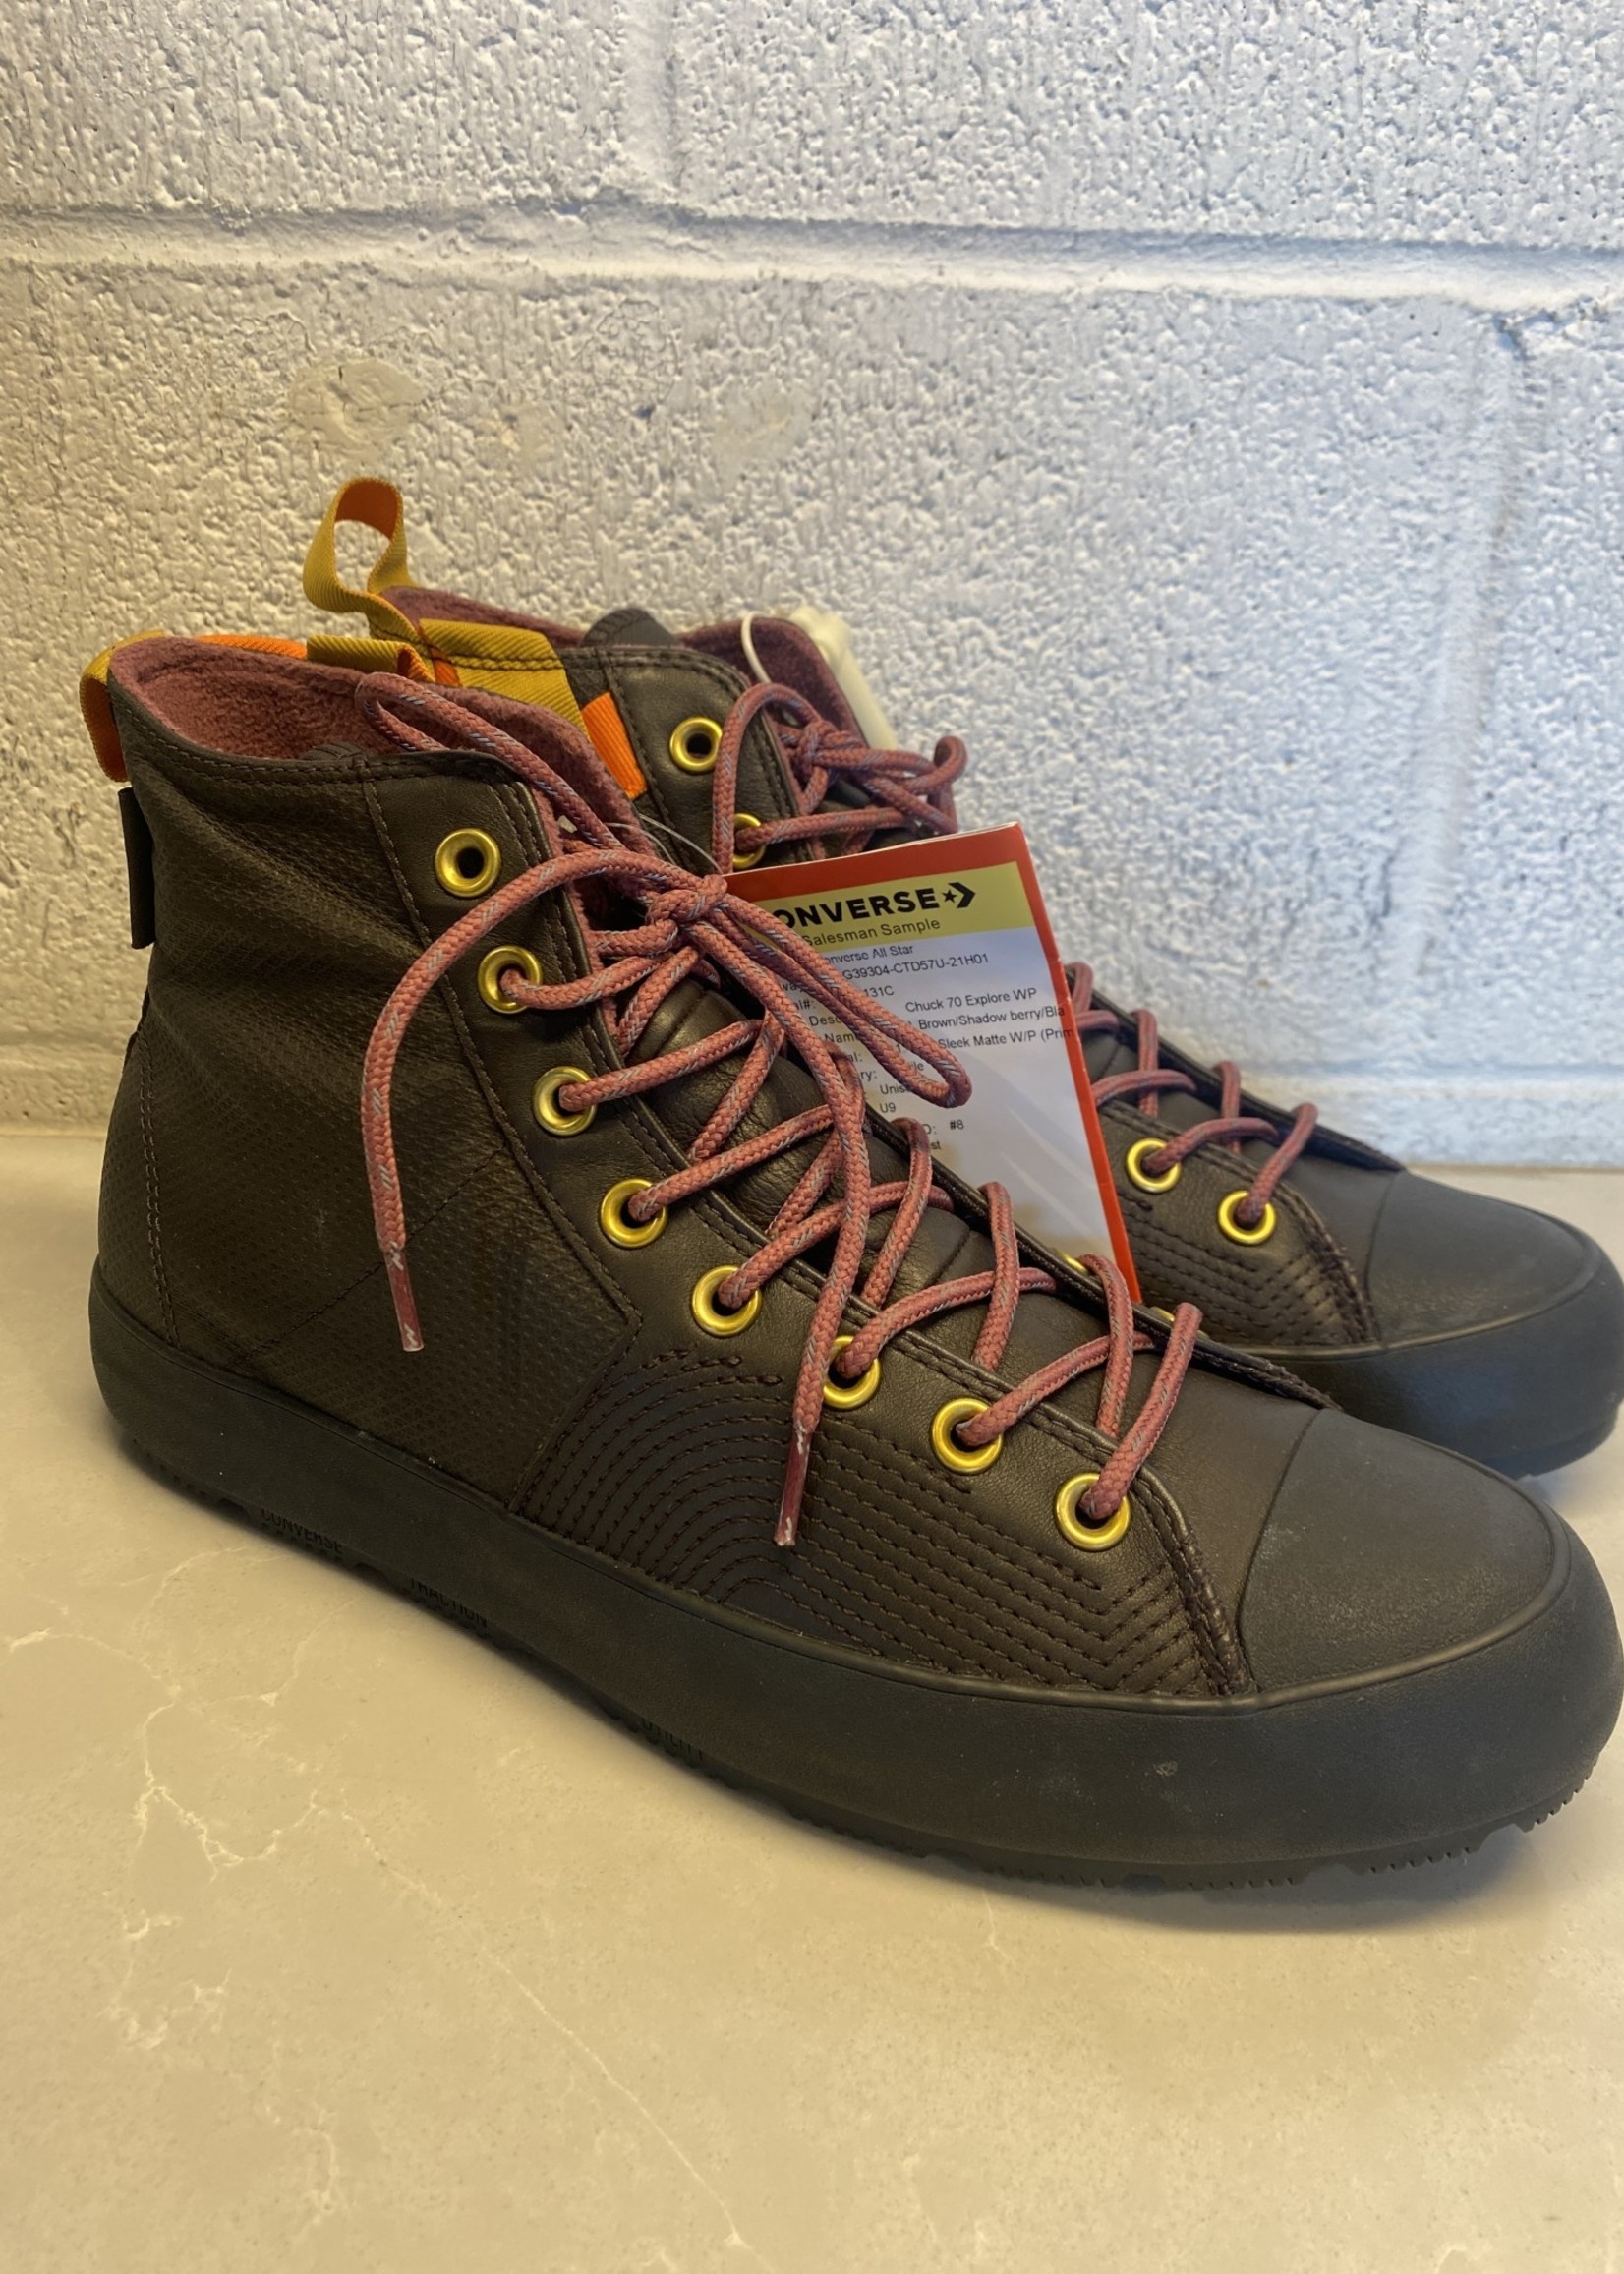 Converse Sample Hiking Shoes 9